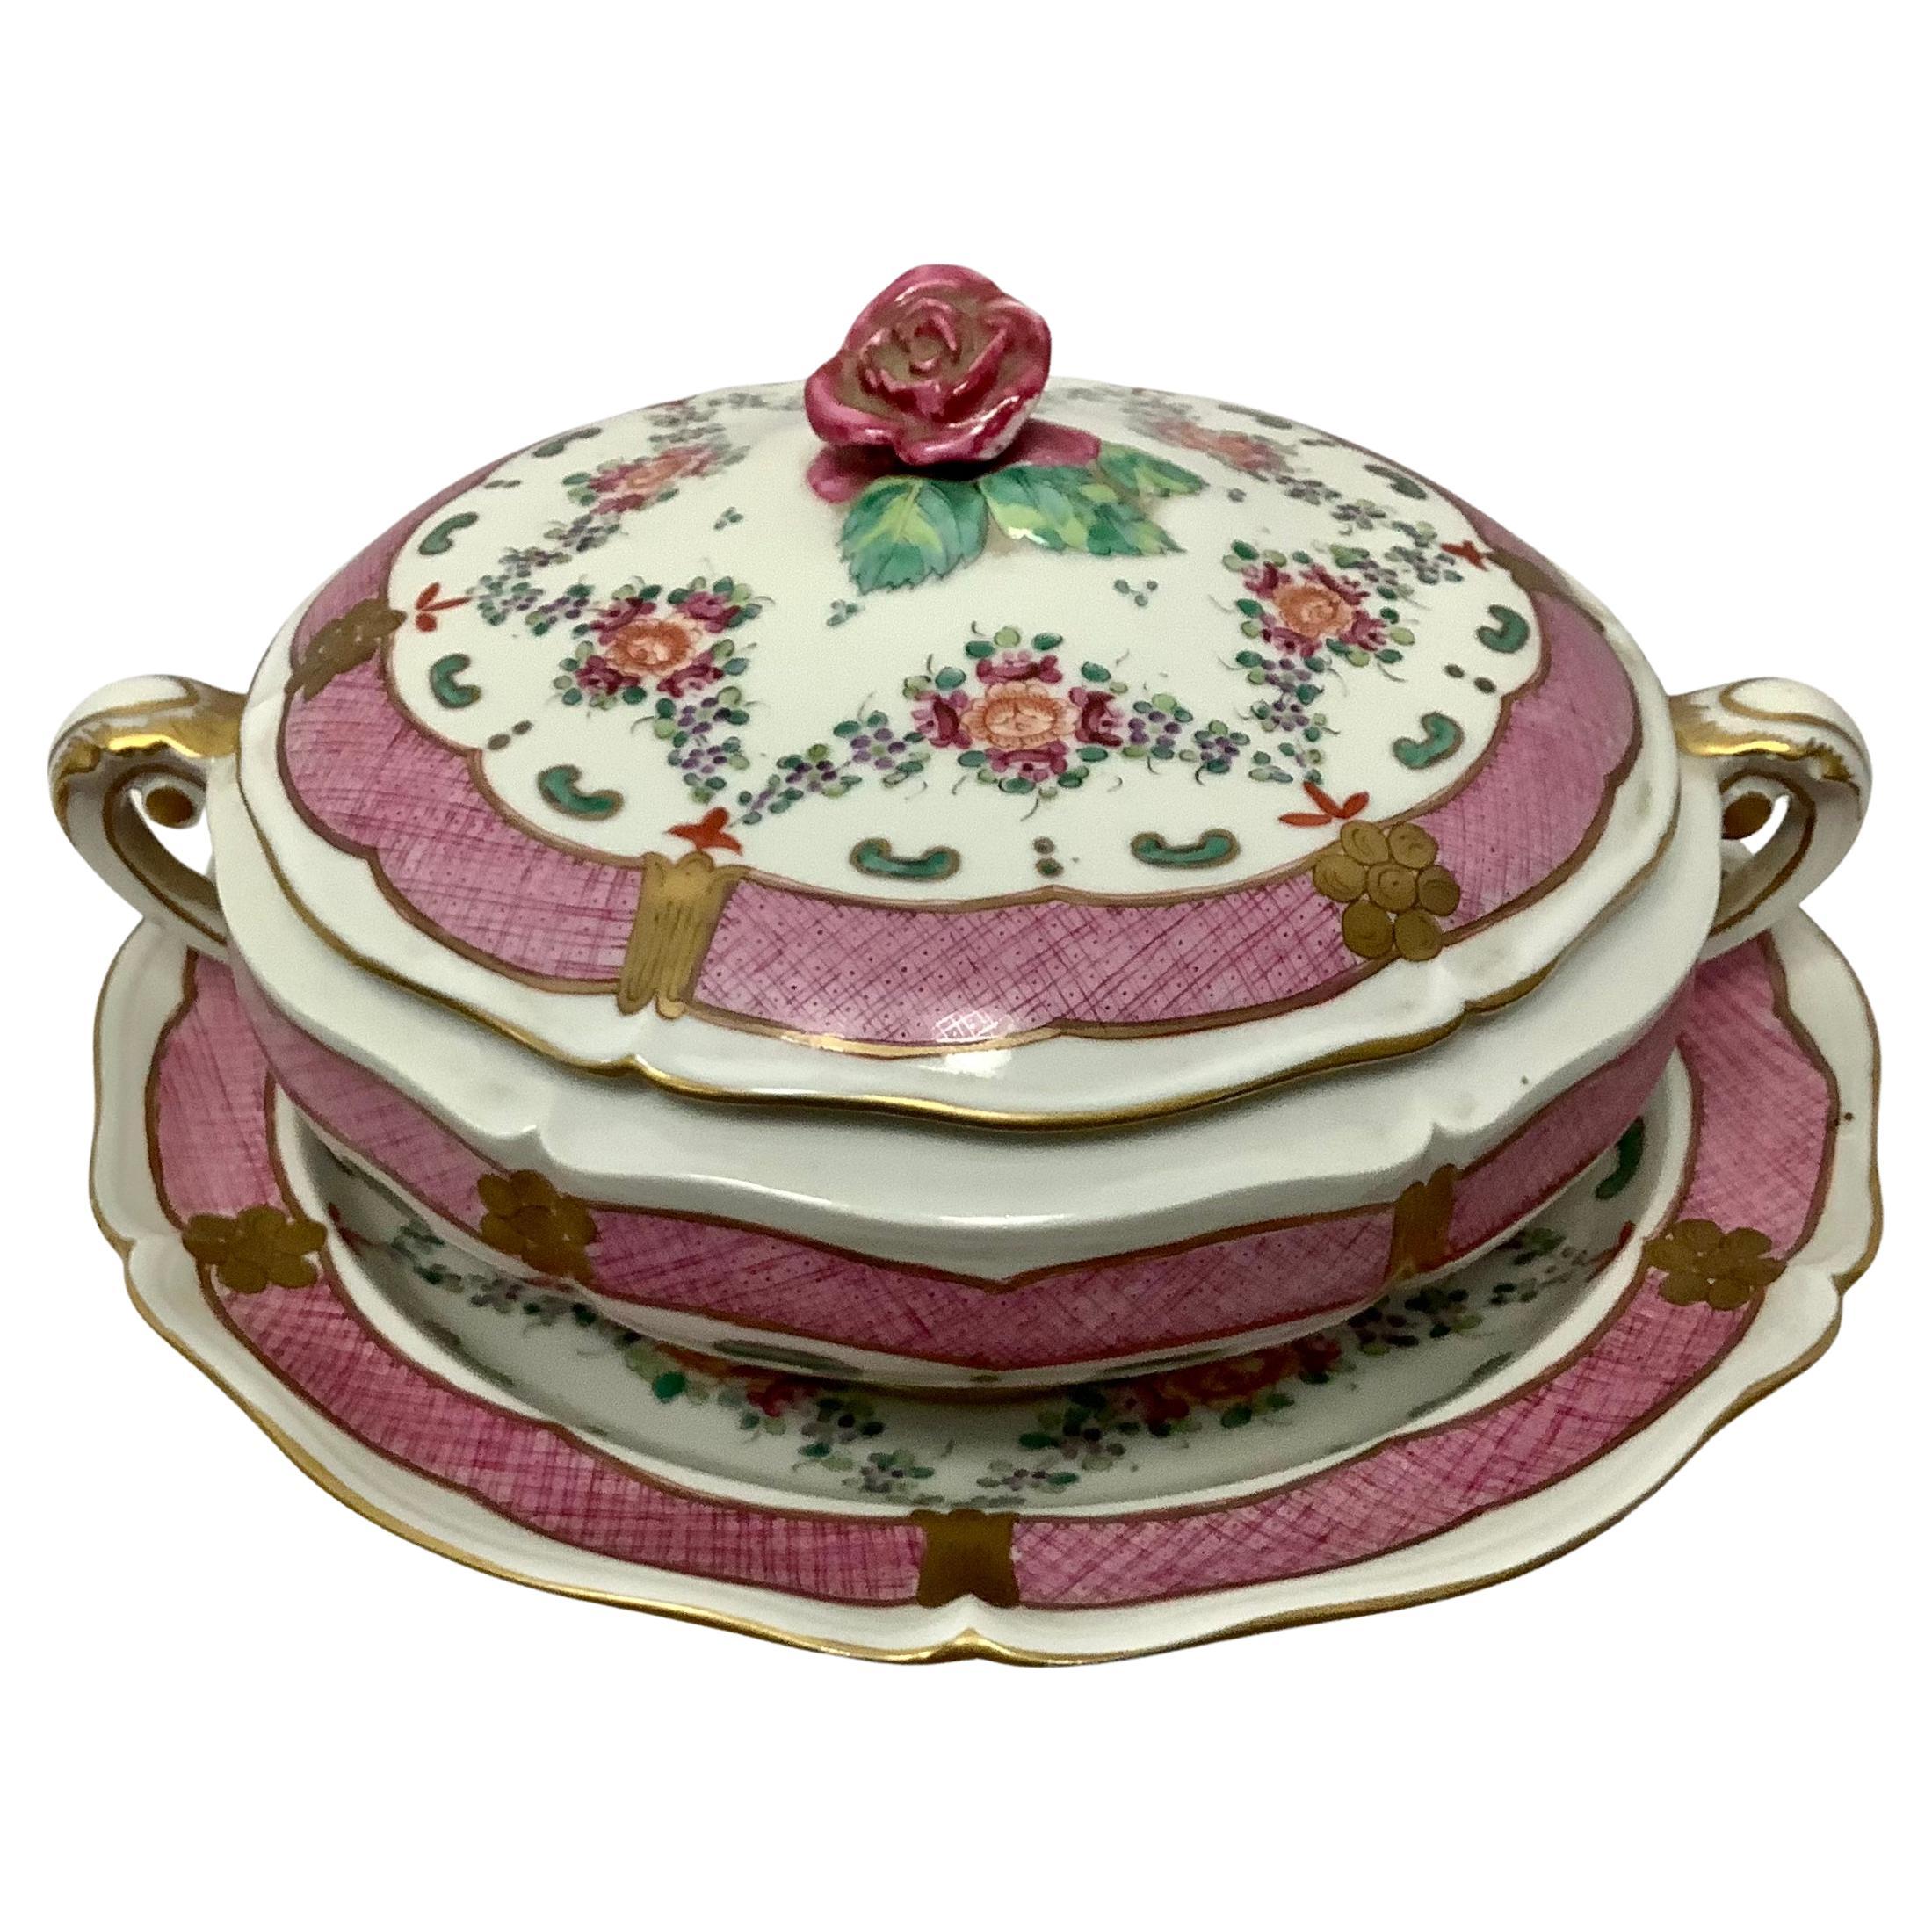 Sampson Large Covered Tureen with Under-Plate For Sale